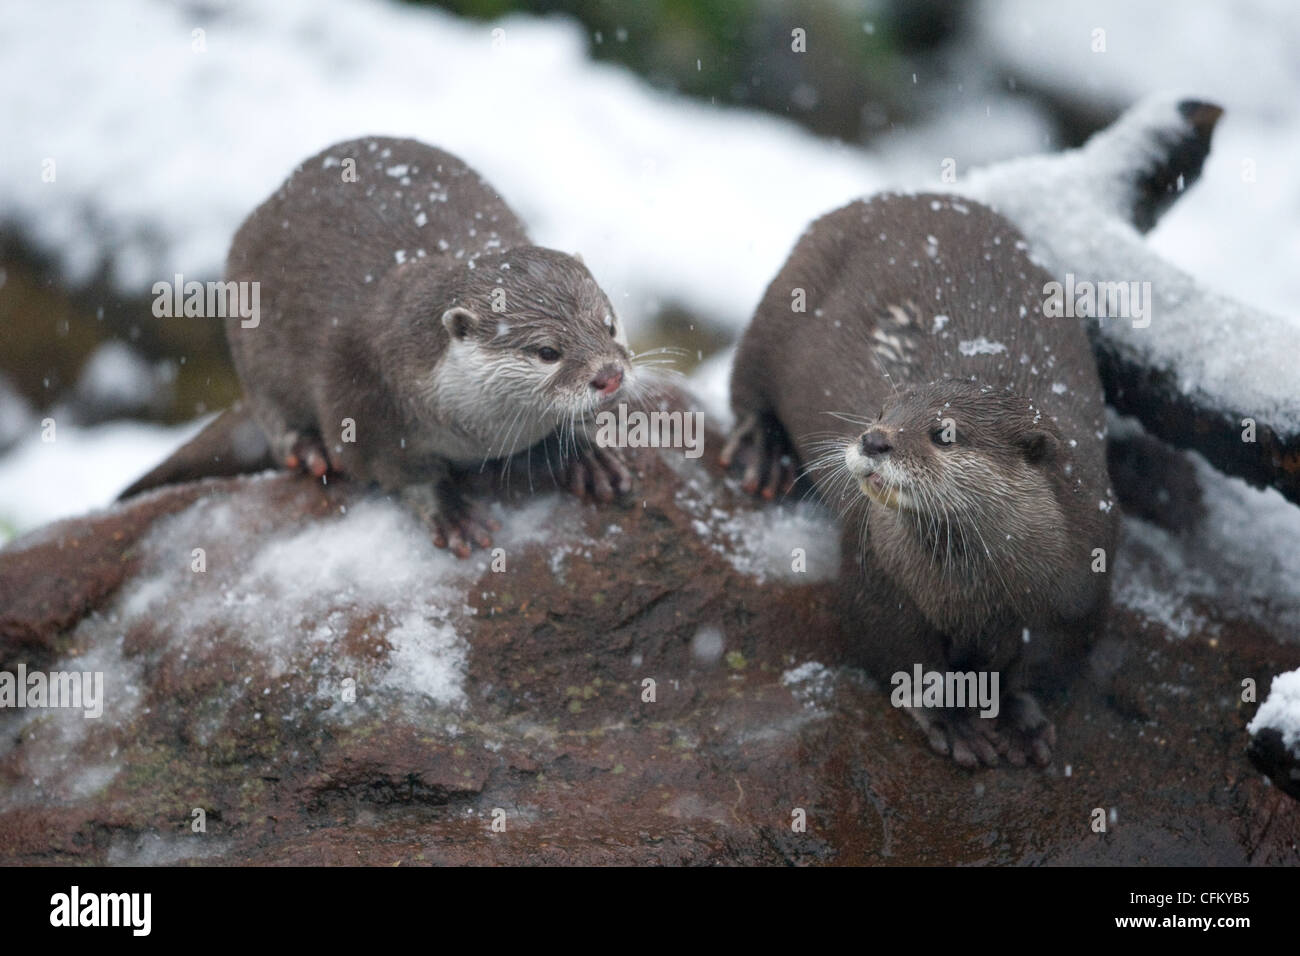 A group of Oriental Small-Clawed Otter on a rock in the snow (Amblonyx cinereus) Stock Photo